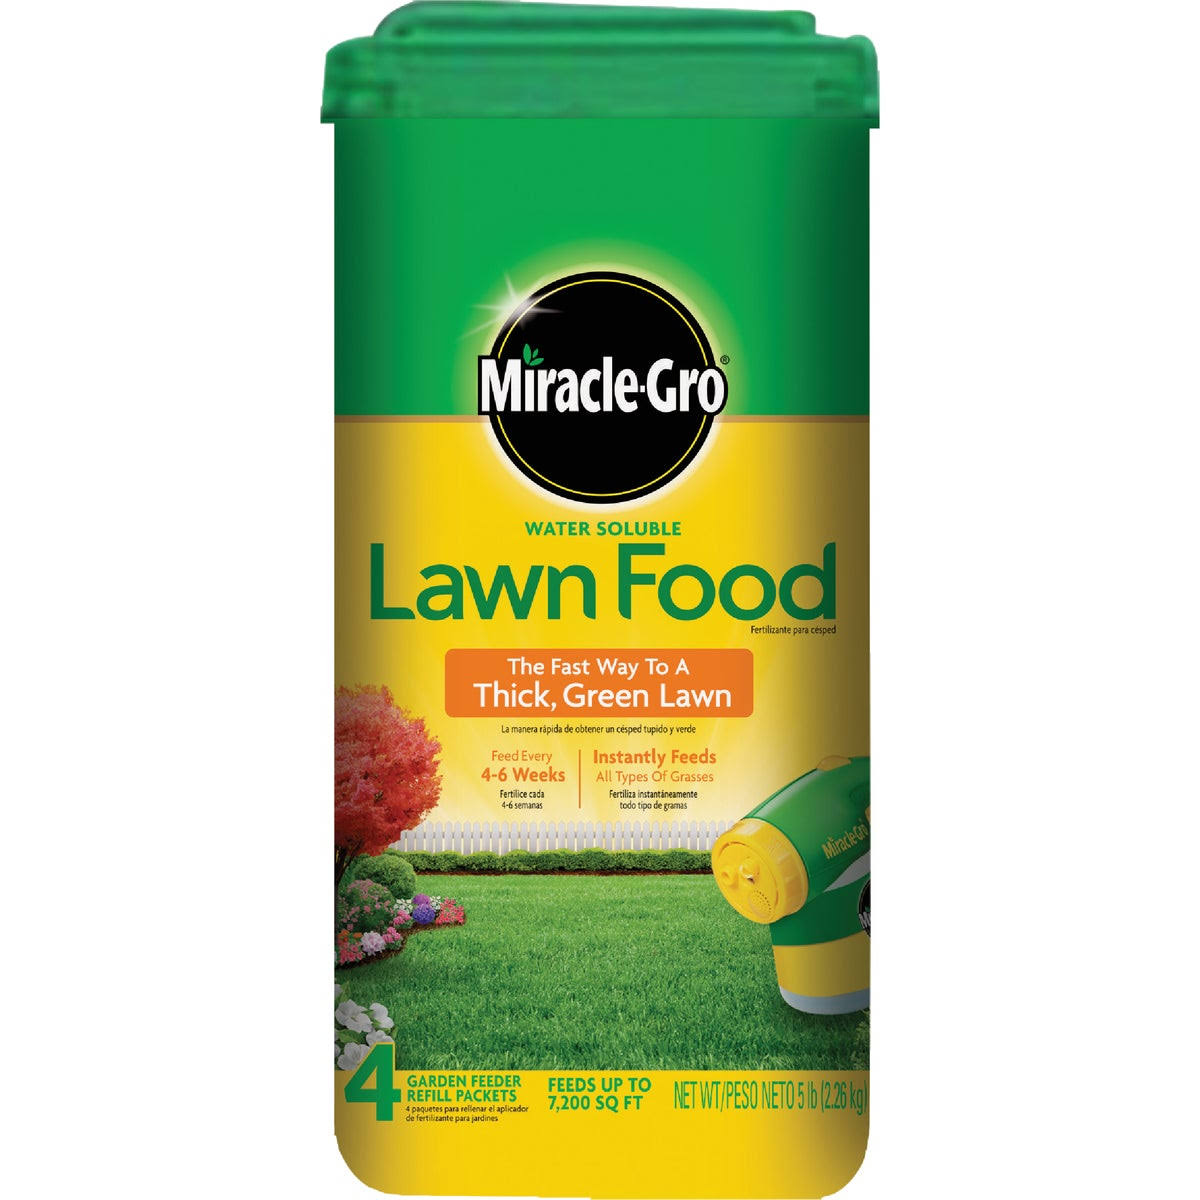 The Scotts Miracle-Gro Lawn Food - 5 lb